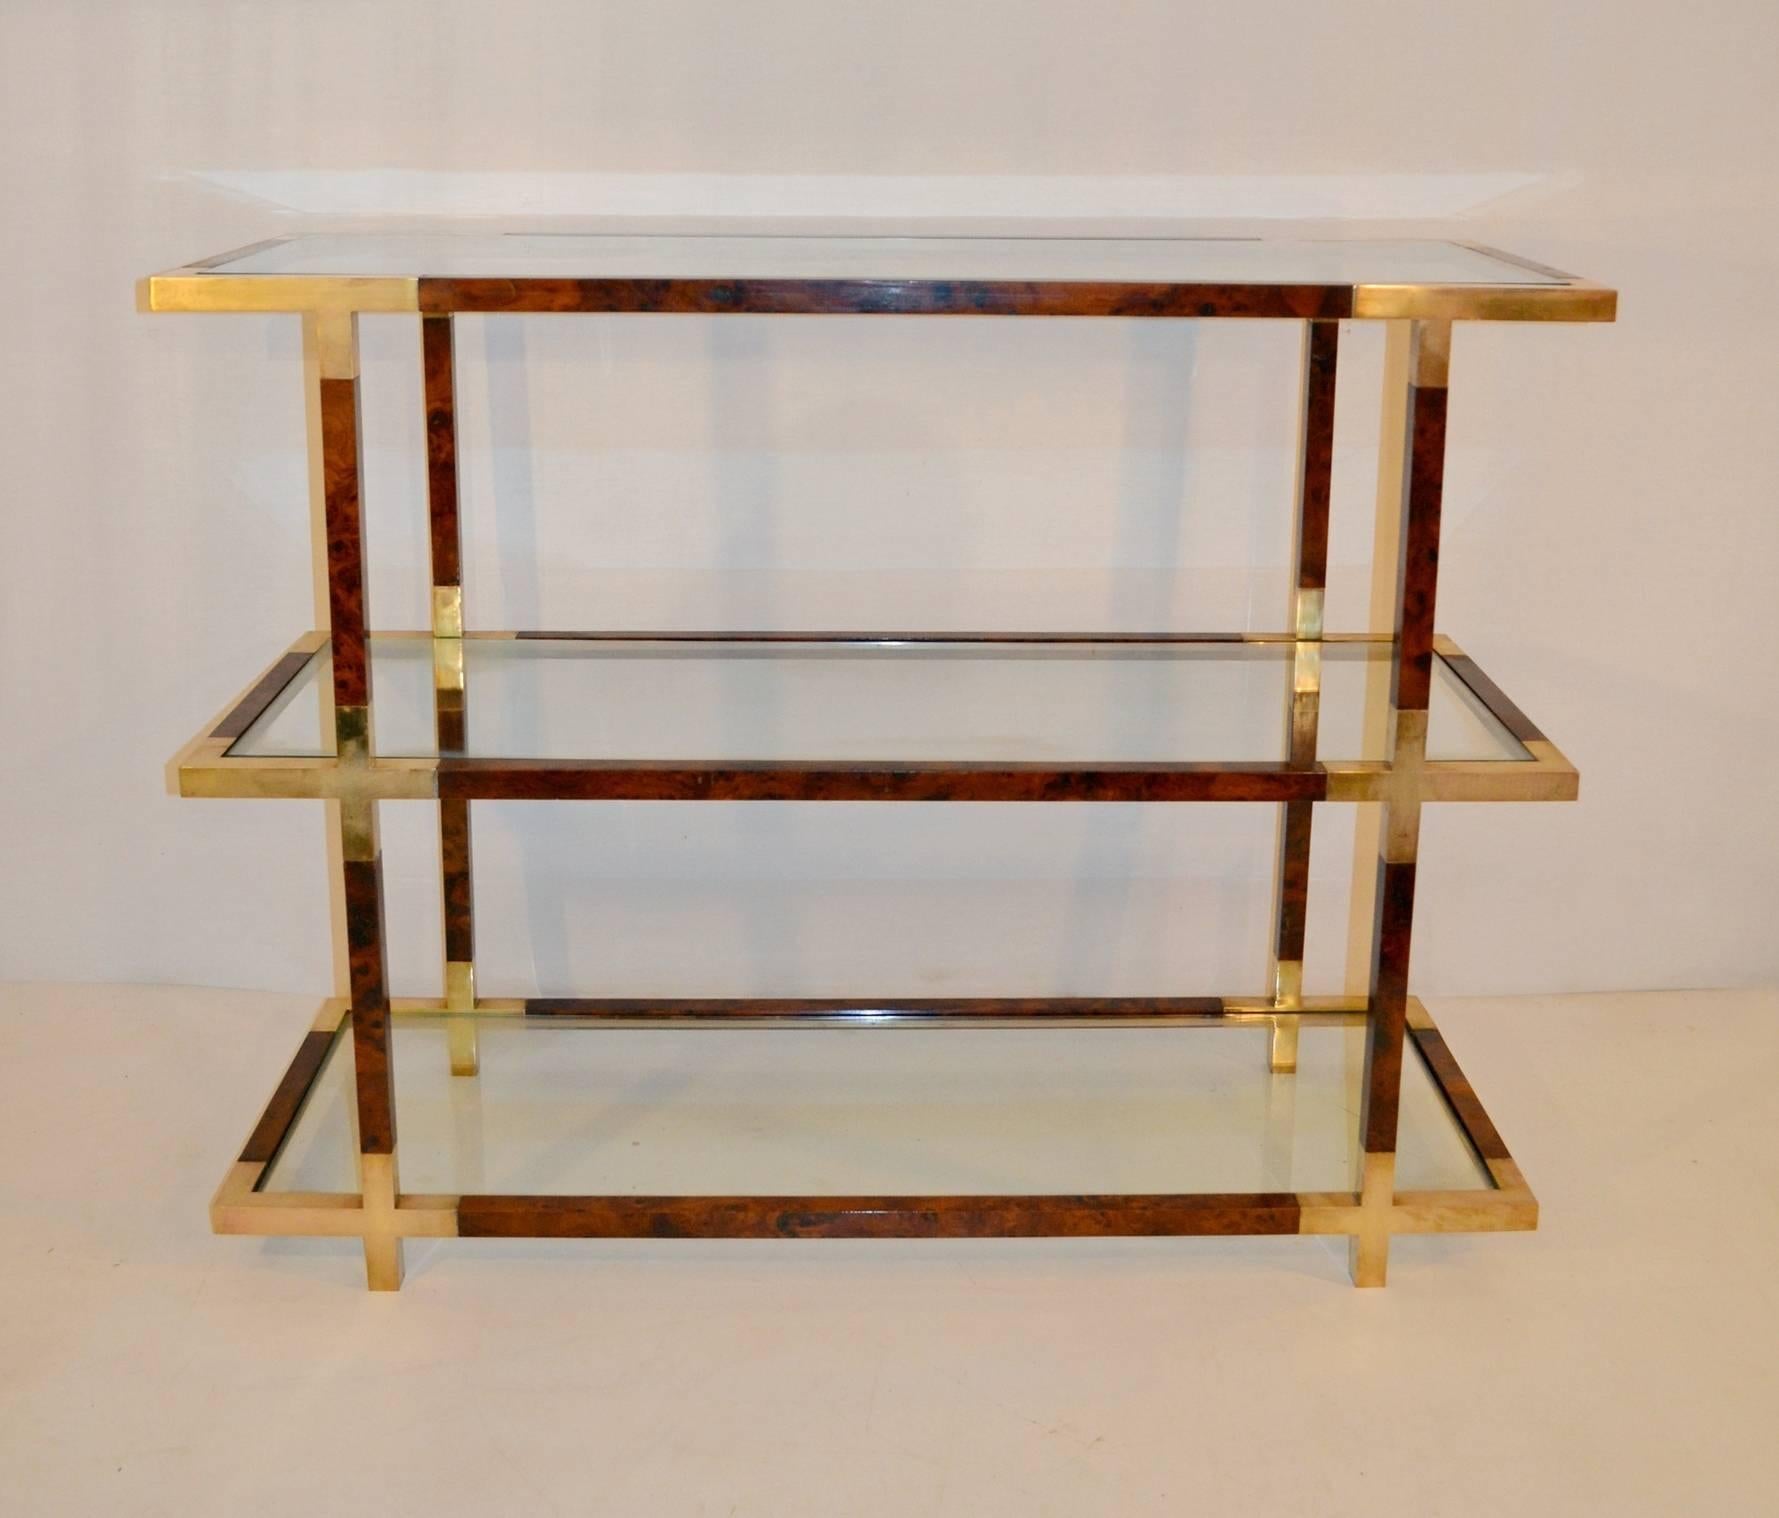 A three tiered etageré with clear glass shelves and a structure in burl wood and brass details. In excellent condition and quality. This piece can be freestanding in a room or in a window as it doesn´t have a backside.